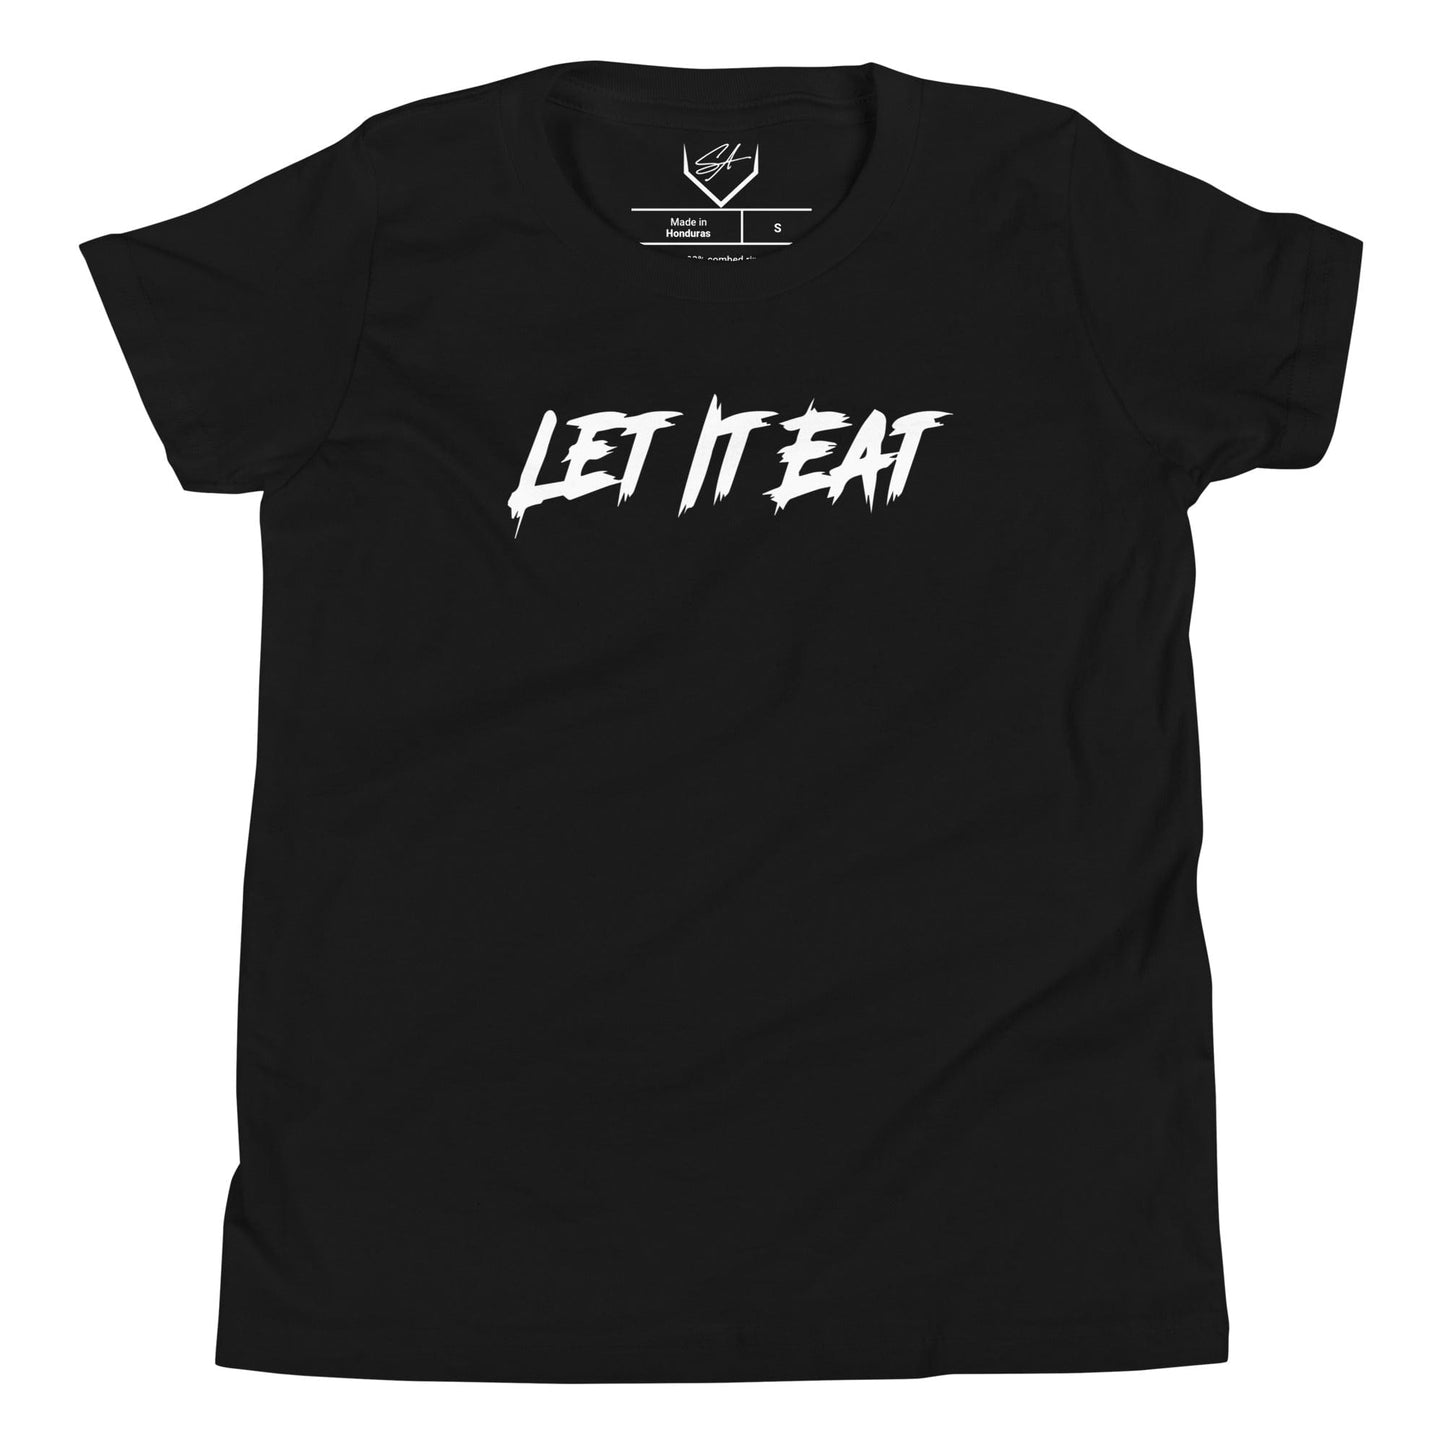 Let it Eat - Youth Tee